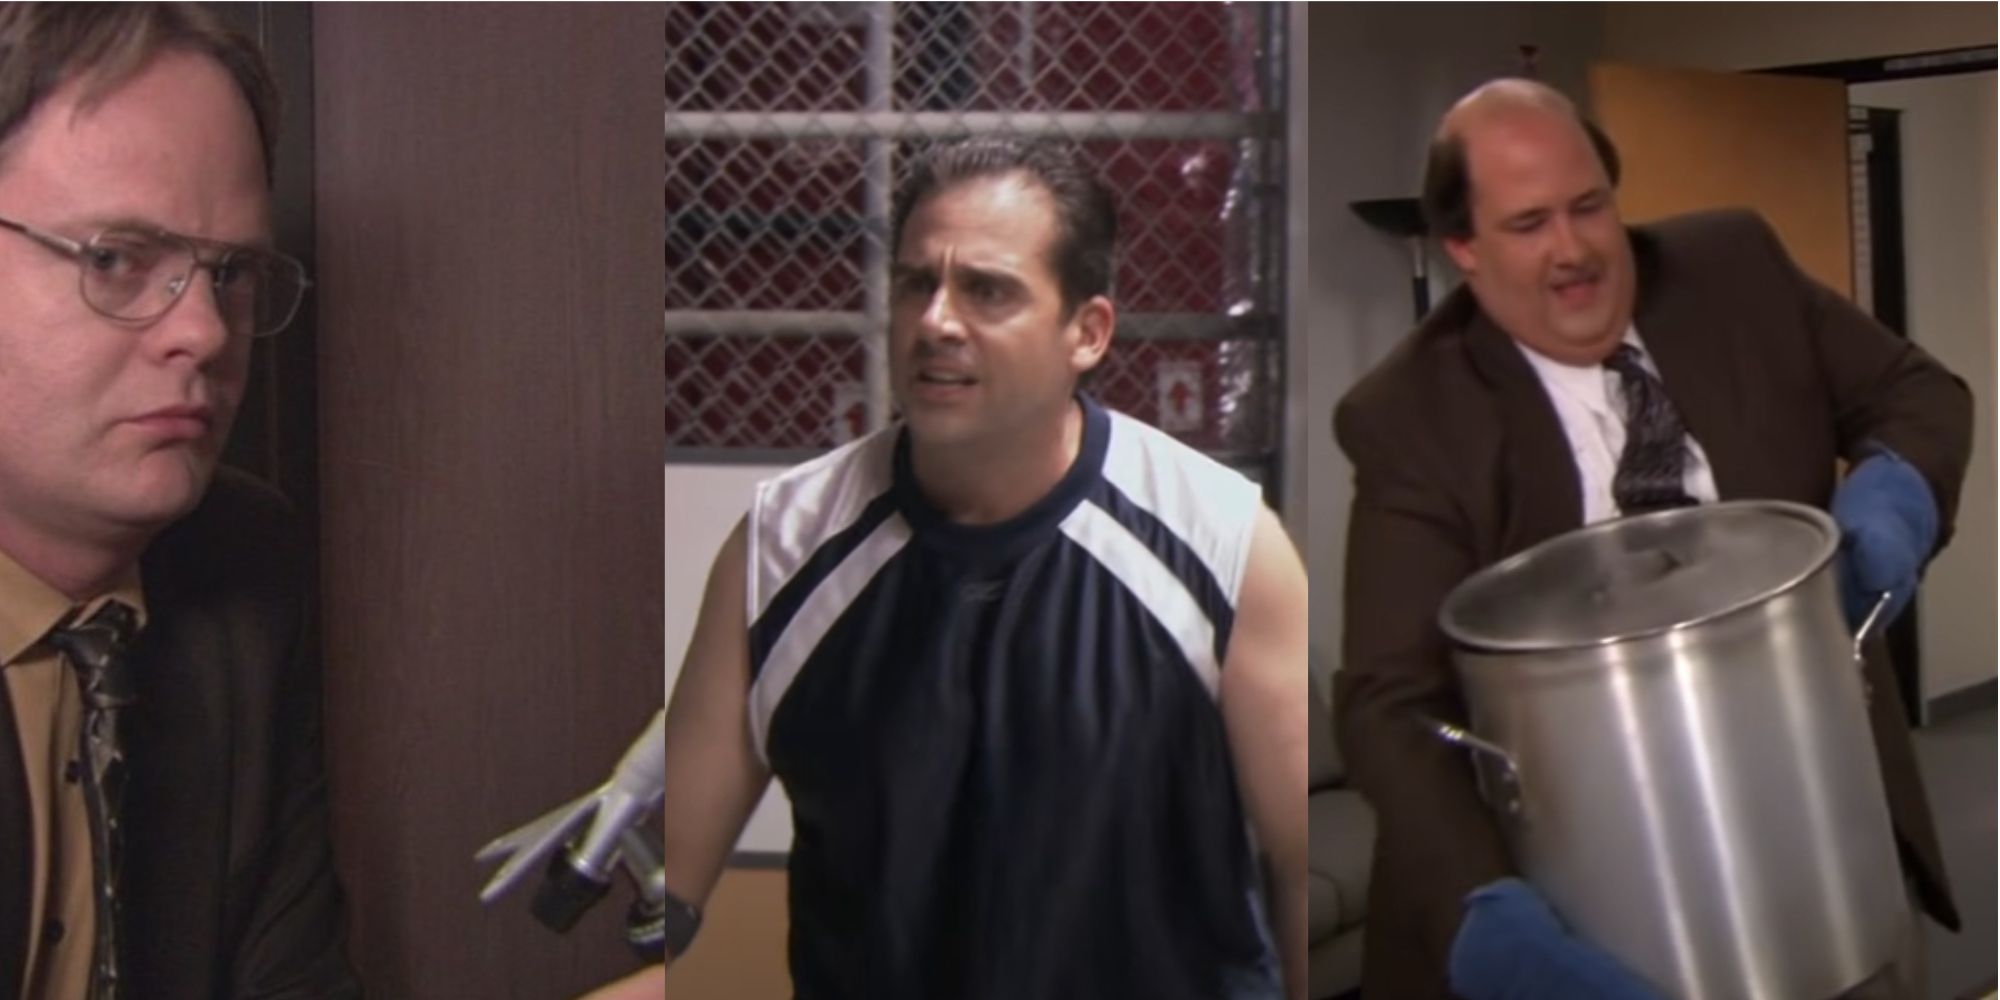 Main feature image showing Dwight Schrute Michael Scott and Kevin Malone from The Office